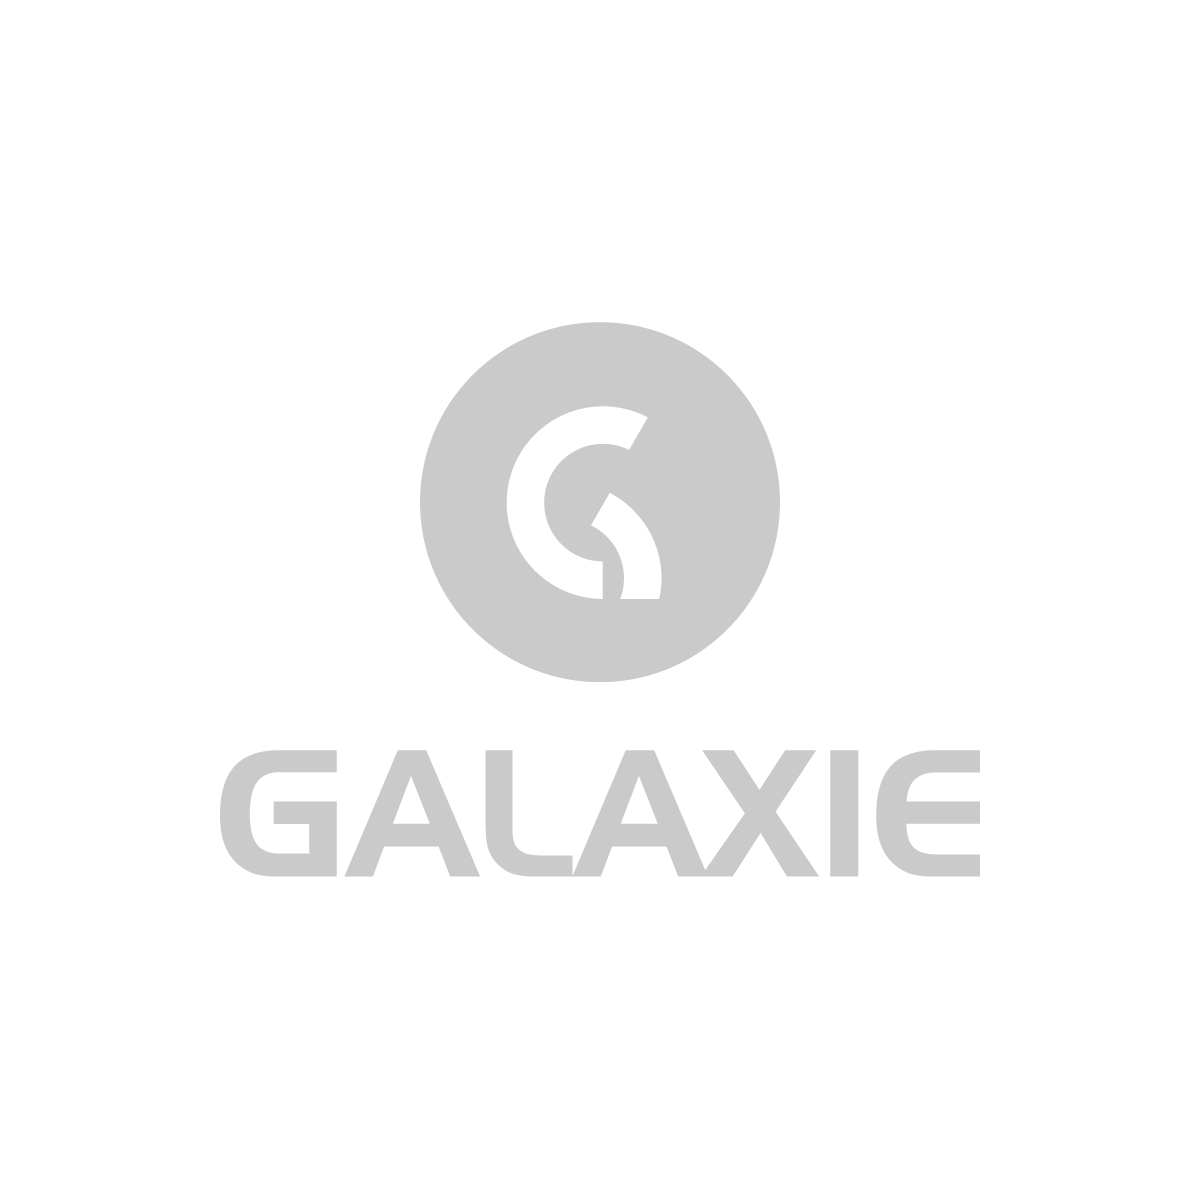 Galaxie groupe